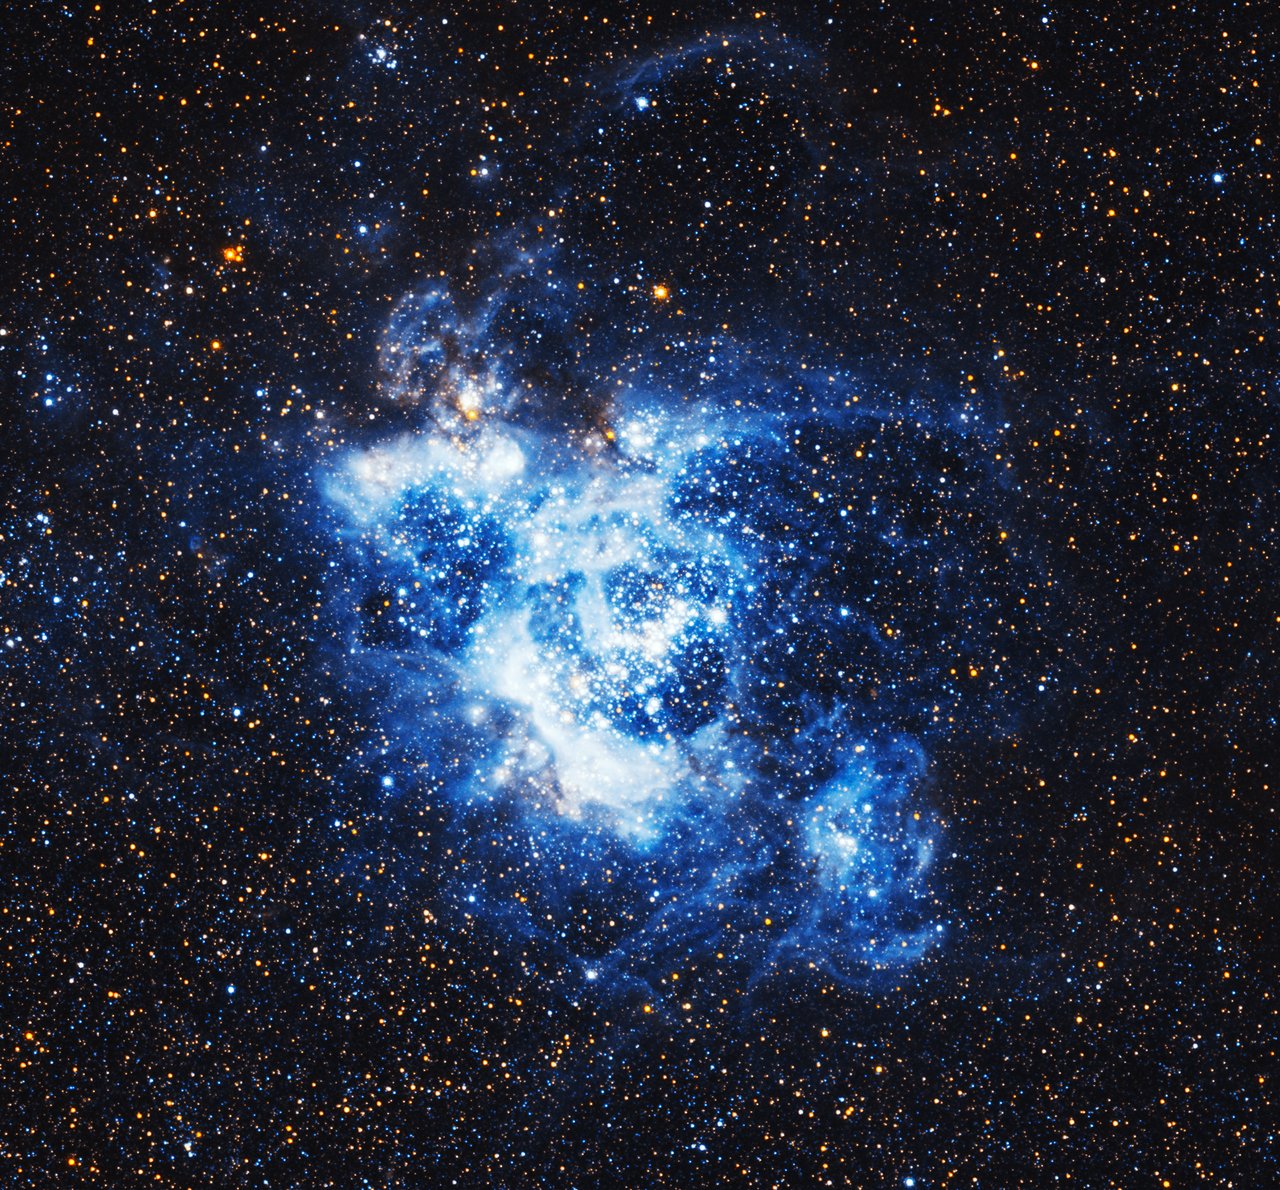 This image shows the NGC 604, located inside the Triangular Galaxy. With about 1,500 light-years in diameter, this is one of the largest and brightest concentrations of ionized hydrogen (H II) in our Local Group of Galaxies, and is an important center of star formation. The gas in NGC 604, about nine-tenths of which is hydrogen, is gradually collapsing under the force of gravity to create new stars. Once these stars have formed, the energetic ultraviolet radiation they emit excites the remaining gas in the cloud. This image is only a small part of the large wide field image of the Triangular Galaxy created by the NASA / ESA Hubble Space Telescope. Hubble has observed this object before, with different cameras: In 2003, using WFPC2 and in 2010, using ACS. The different colors in the images have their origin in the different filters that are being used. Credit: NASA, ESA and M. Durbin, J. Dalcanton and BF Williams (University of Washington) "width =" 1280 "height =" 1190 "srcset =" https://www.techexplorist.com/wp-content/ uploads /2019/01/heic1901b.jpg 1280w, https://www.techexplorist.com/wp-content/uploads/2019/01/heic1901b-150x139.jpg 150w, https://www.techexplorist.com/wp -content / uploads / 2019/01 / heic1901b-300x279.jpg 300w, https://www.techexplorist.com/wp-content/uploads/2019/01/heic1901b-768x714.jpg 768w, https: //www.techexplorist .com / wp-content / uploads / 2019/01 / heic1901b-1024x952.jpg 1024w, https://www.techexplorist.com/wp-content/uploads/2019/01/heic1901b-696x647.jpg 696w, https: / / www .techexplorist.com / wp-content / uploads / 2019/01 / heic1901b-1068x993.jpg 1068w, https://www.techexplorist.com/wp-content/uploads/2019/01/heic1901b-452x420.jpg 452w, https : //www.techexplorist.com/wp-content/uploads/2019/01/heic1901b-904x840.jpg 904w "sizes =" (maximum width: 1280px) 100vw, 1280px